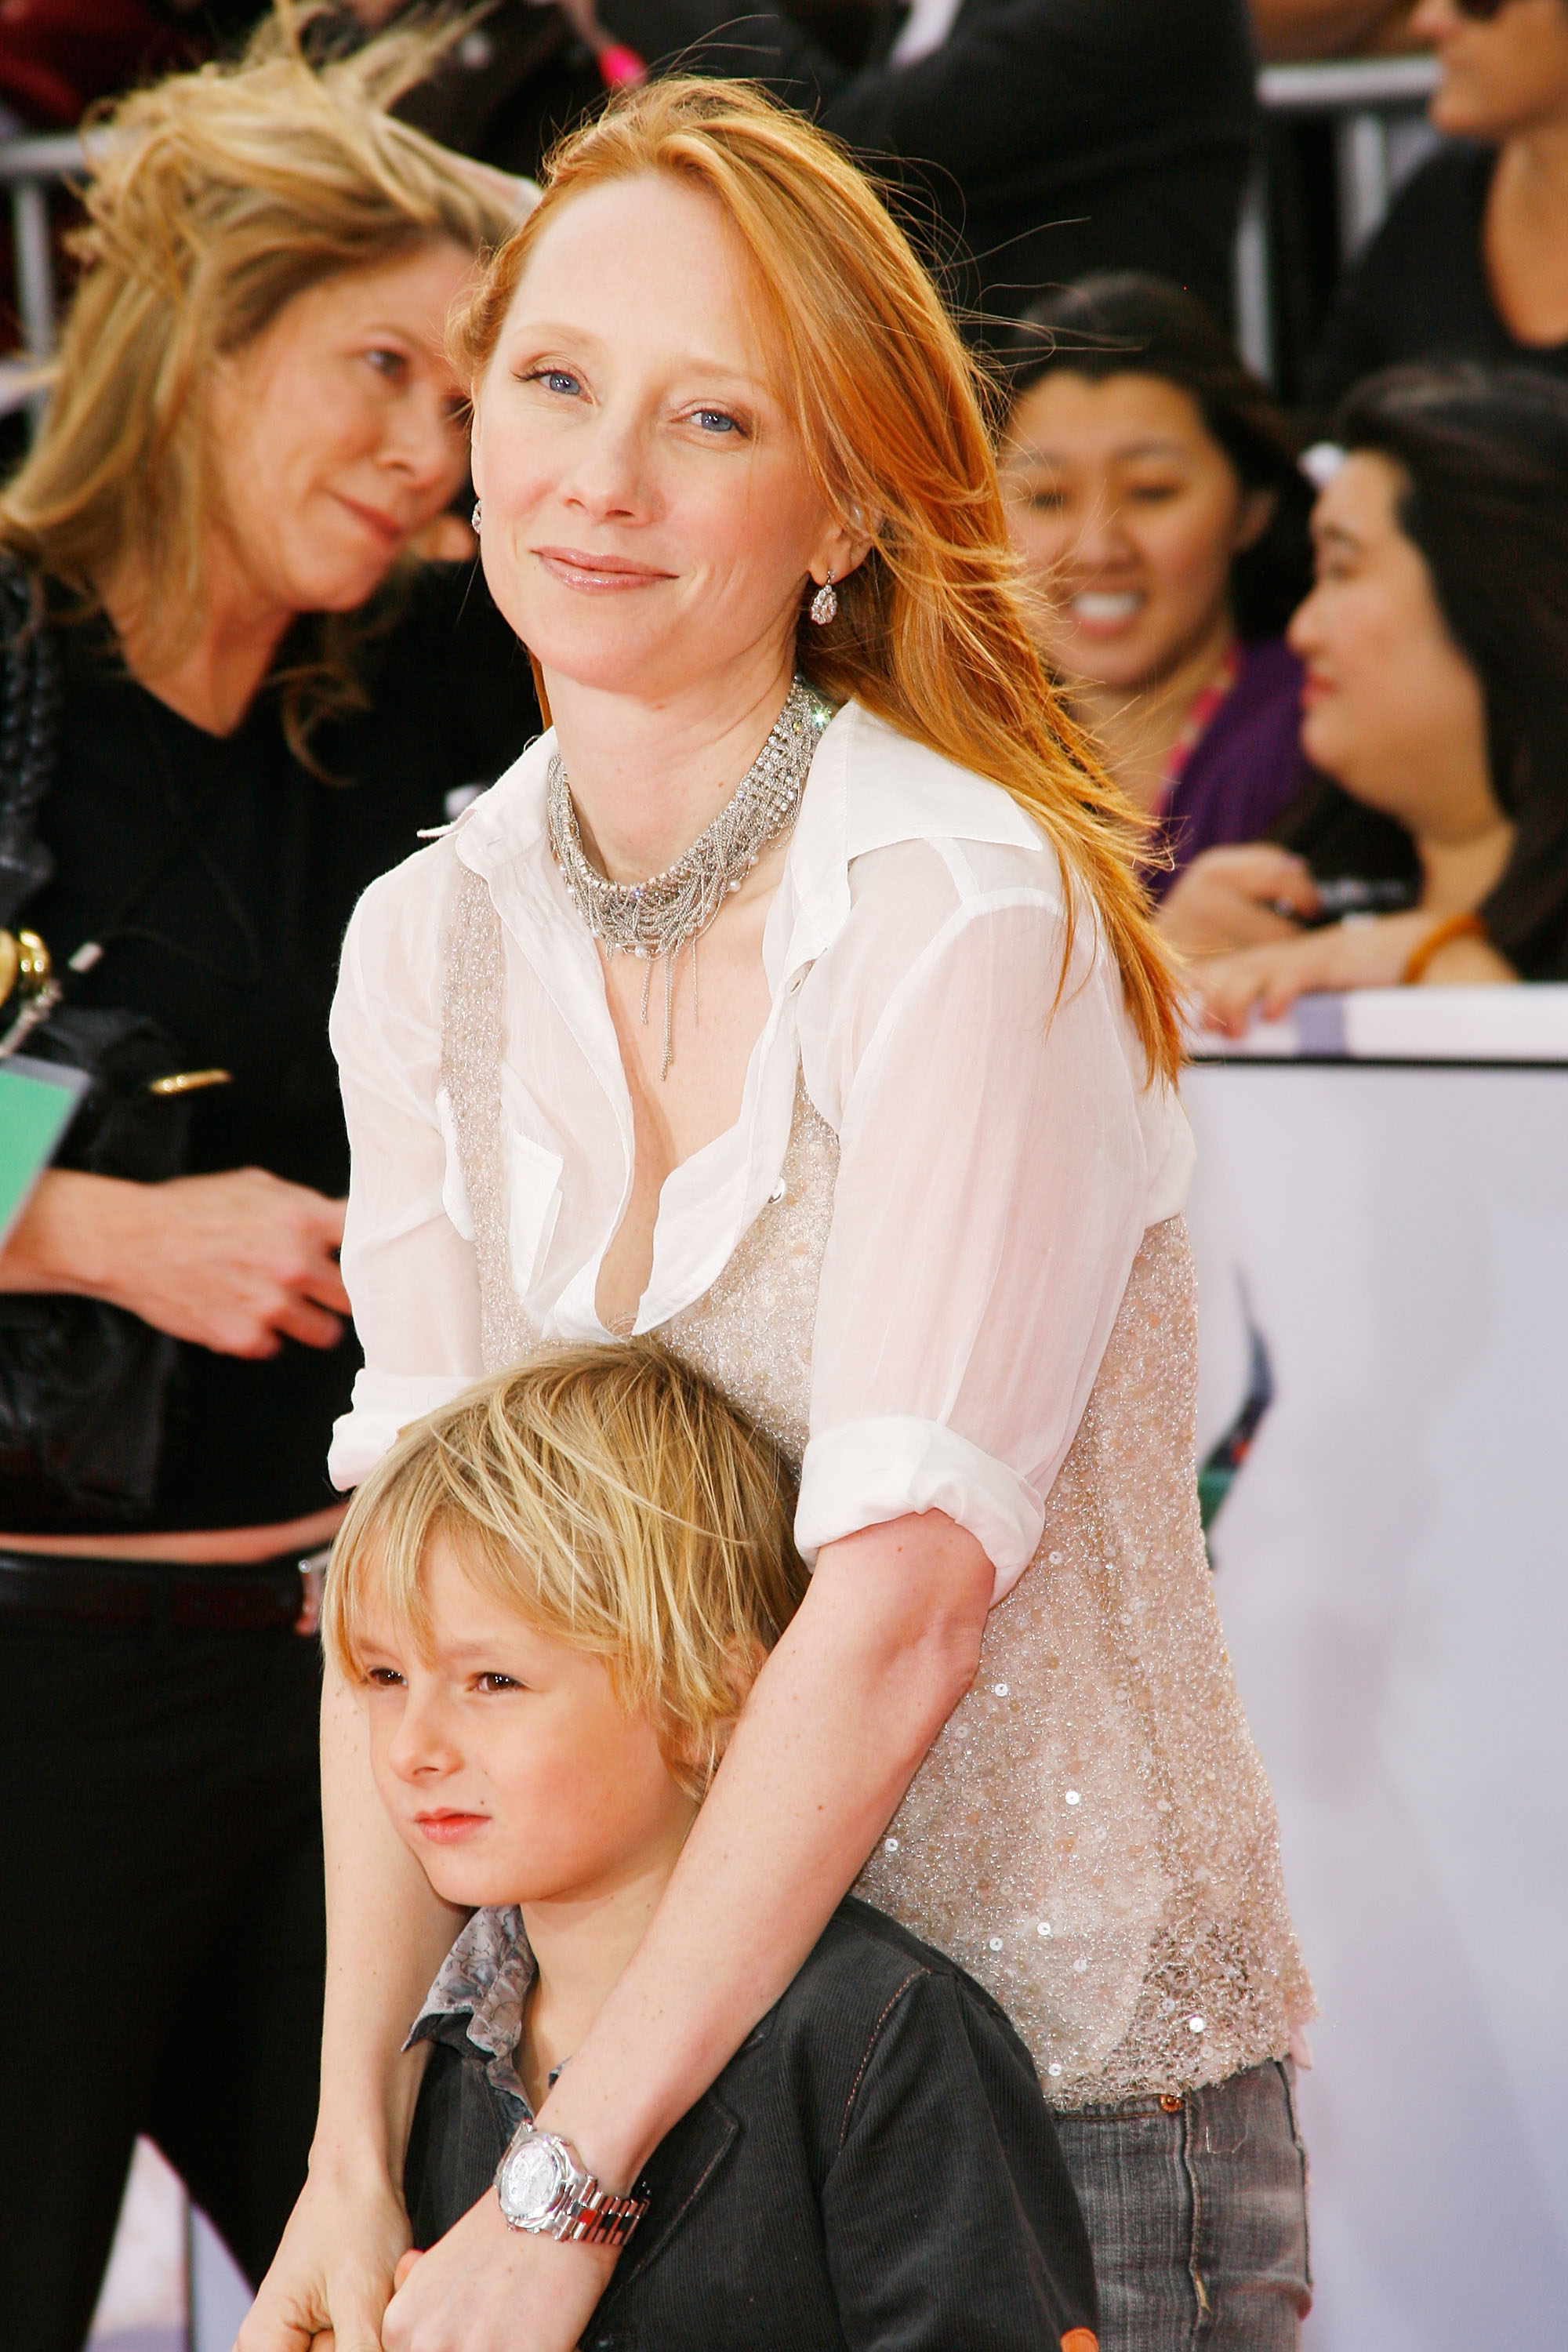 Anne Heche and son, Homer Heche Laffoon arrive to Michael Jackson's "This Is It" - Los Angeles premiere held at Nokia Theatre - L.A. Live on October 27, 2009 in Los Angeles, California. | Source: Getty Images